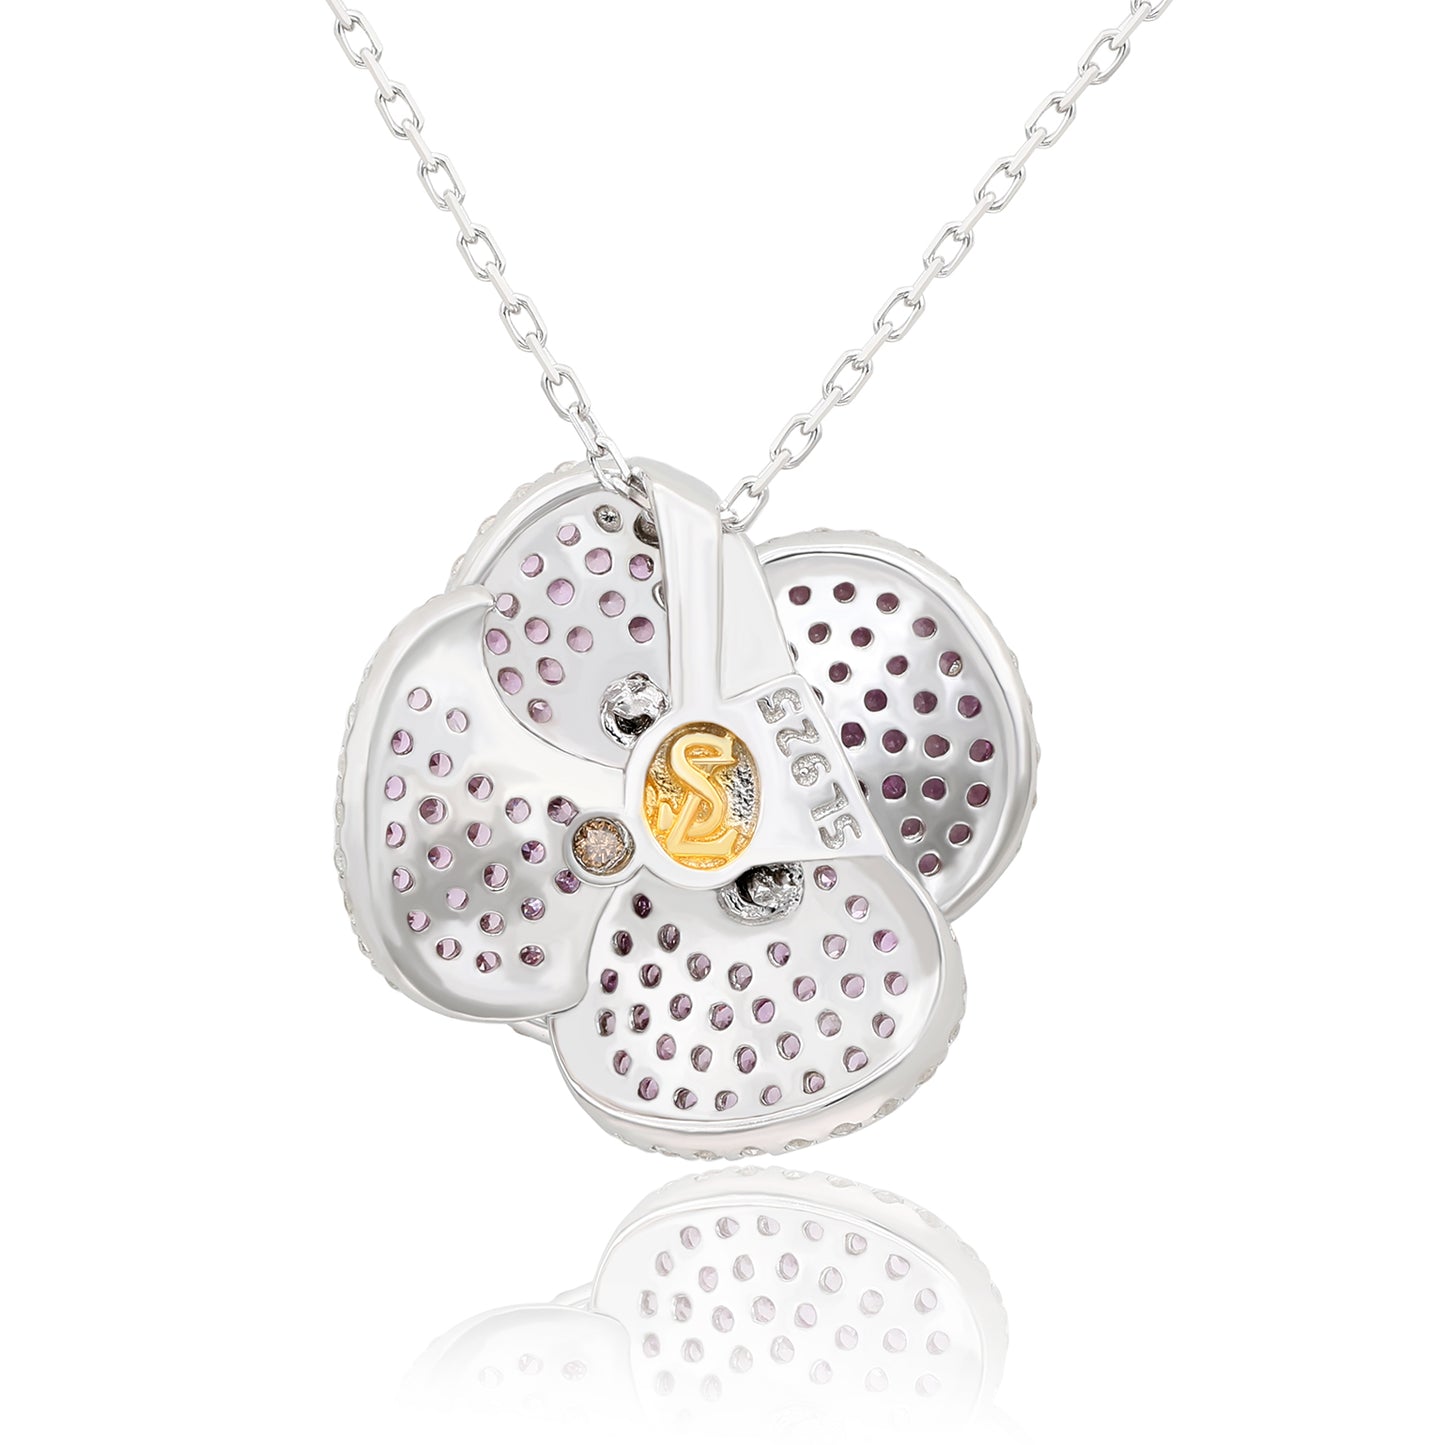 Suzy Levian Sterling Silver Pink Sapphire and Diamond Pave Peony Flower Pendant with Chain